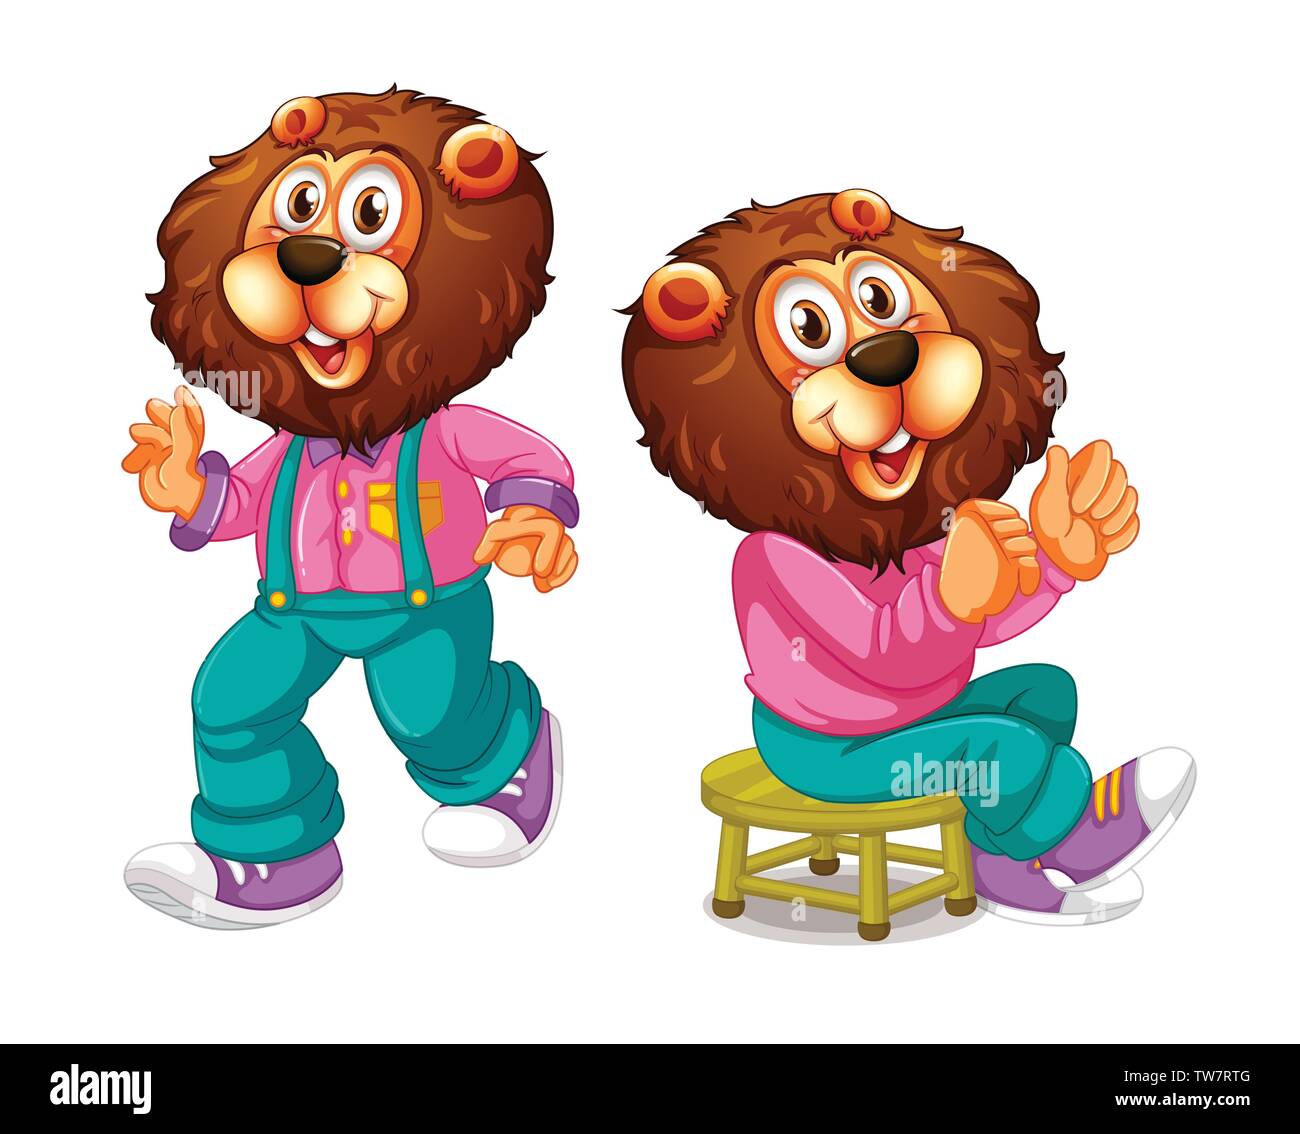 Set of lion character illustration Stock Vector